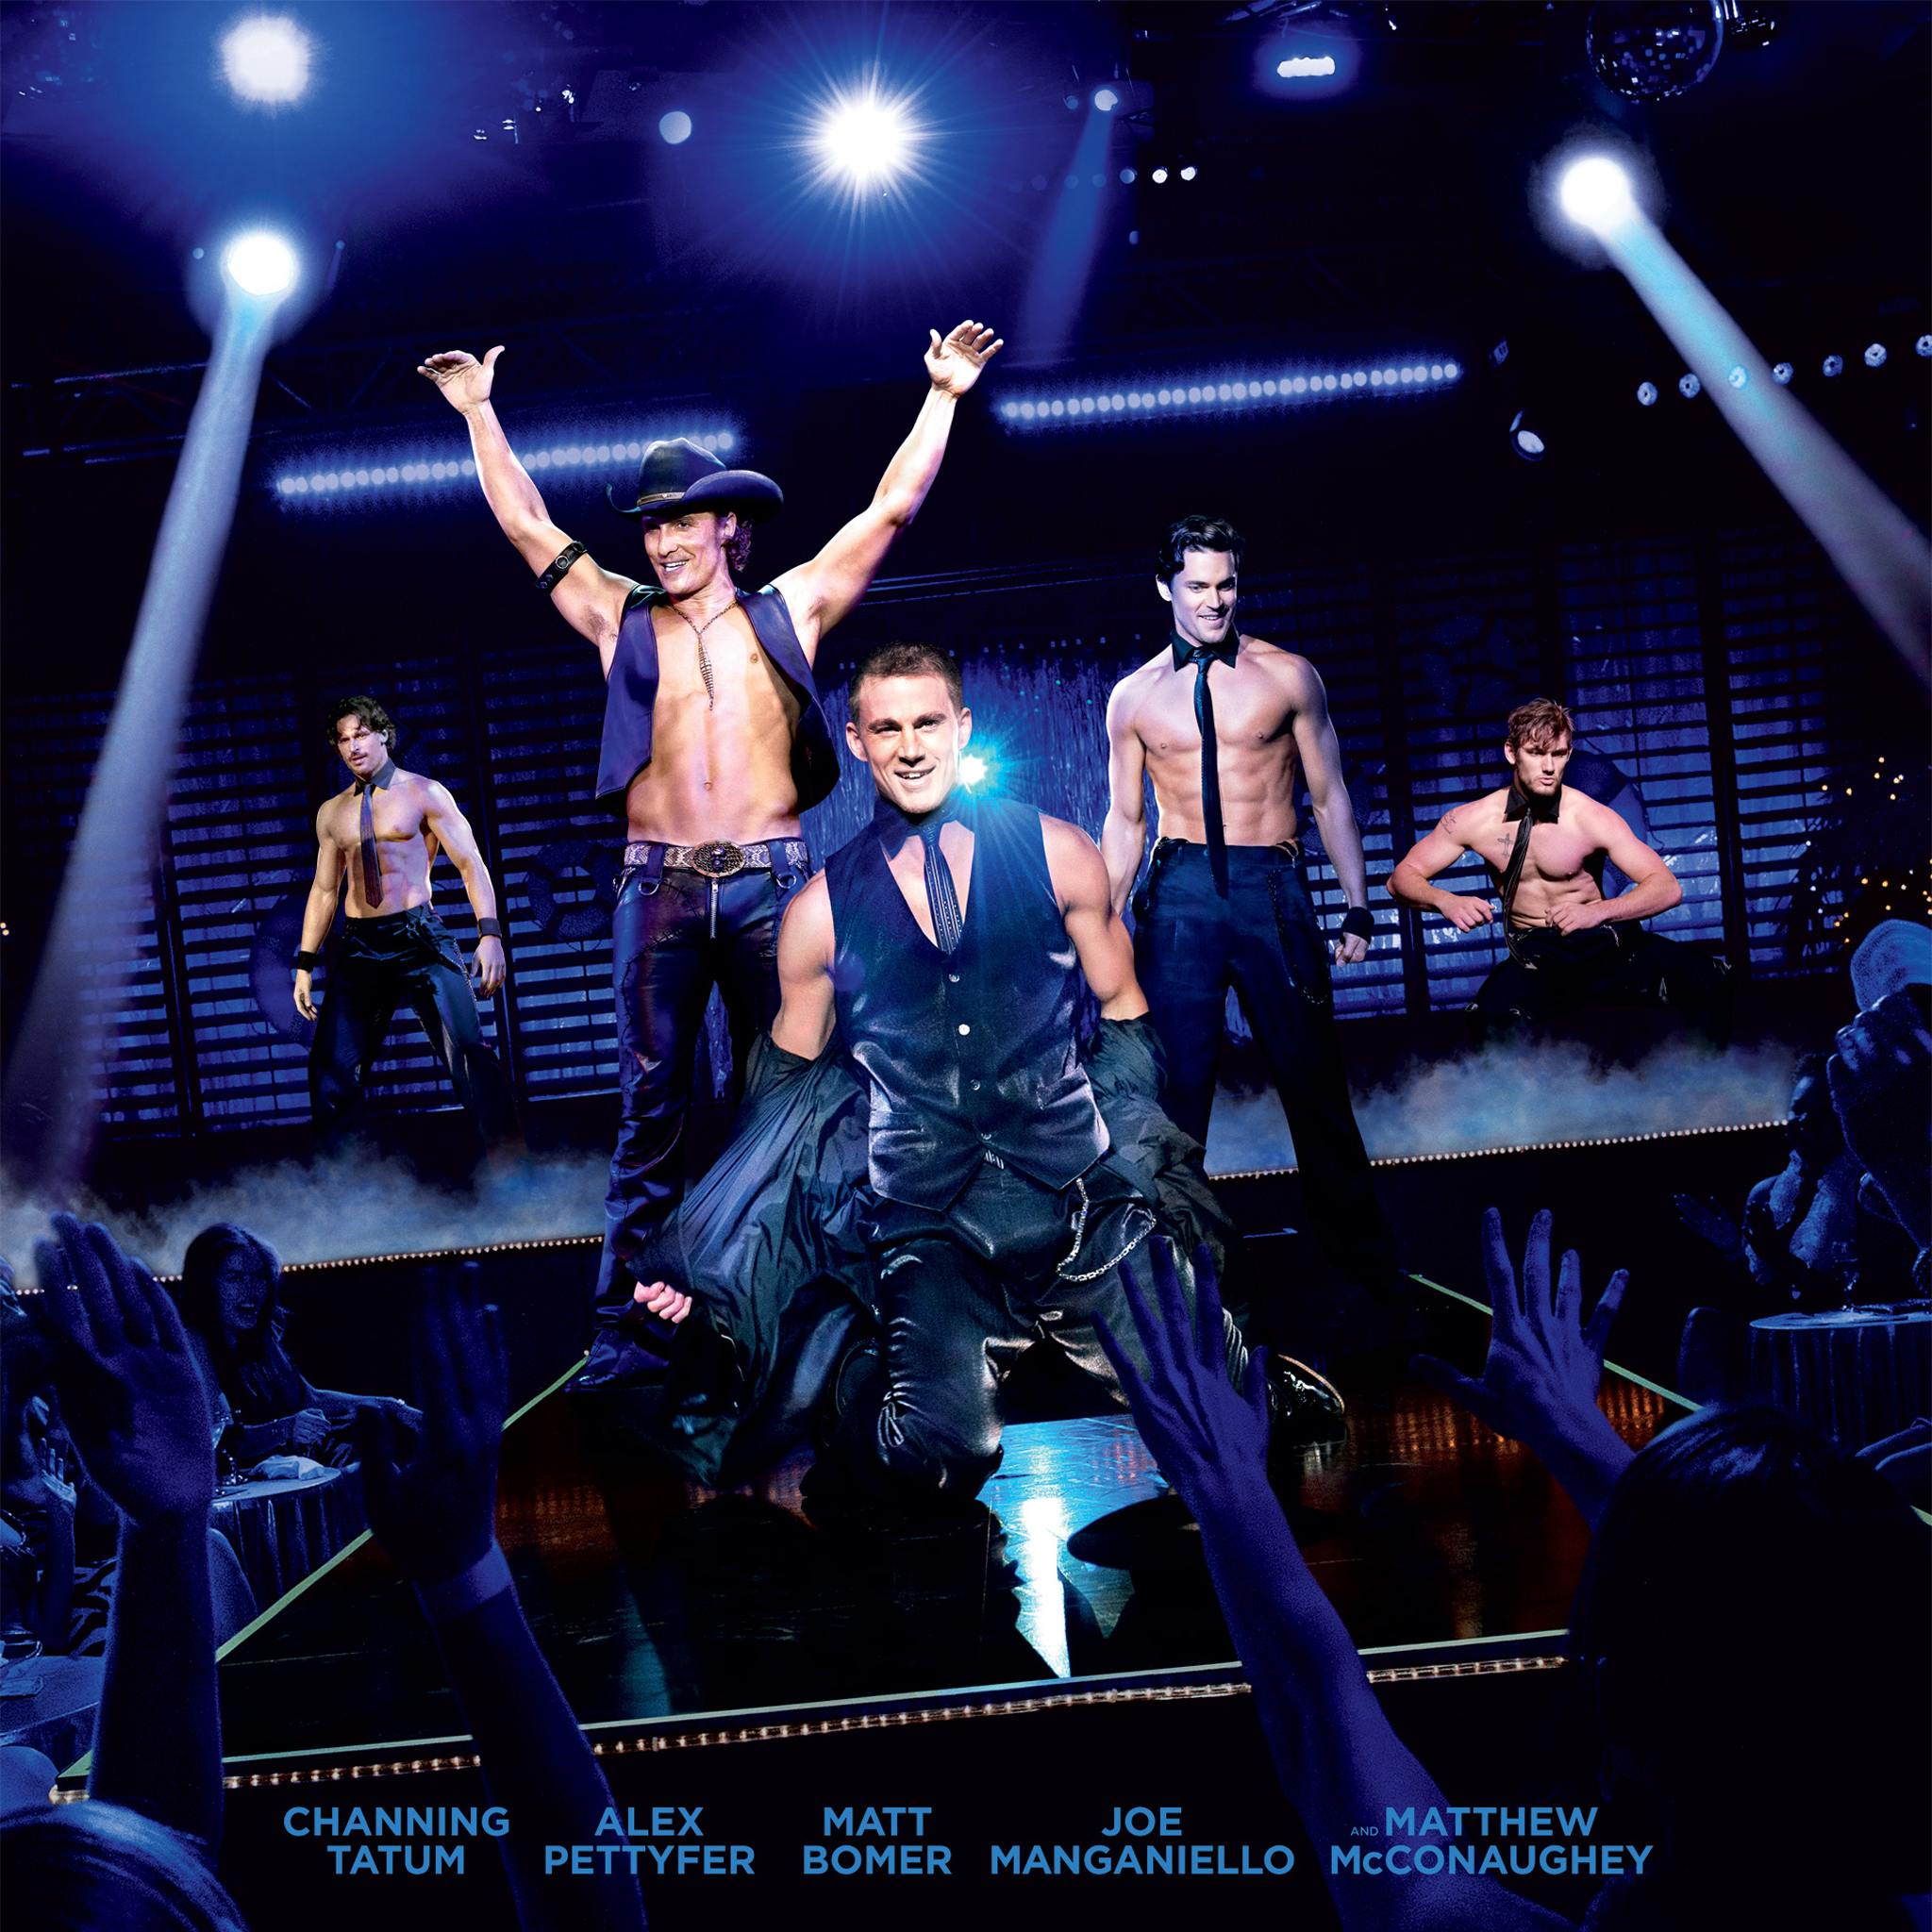 Magic Mike For New iPad Wallpaper June Of The